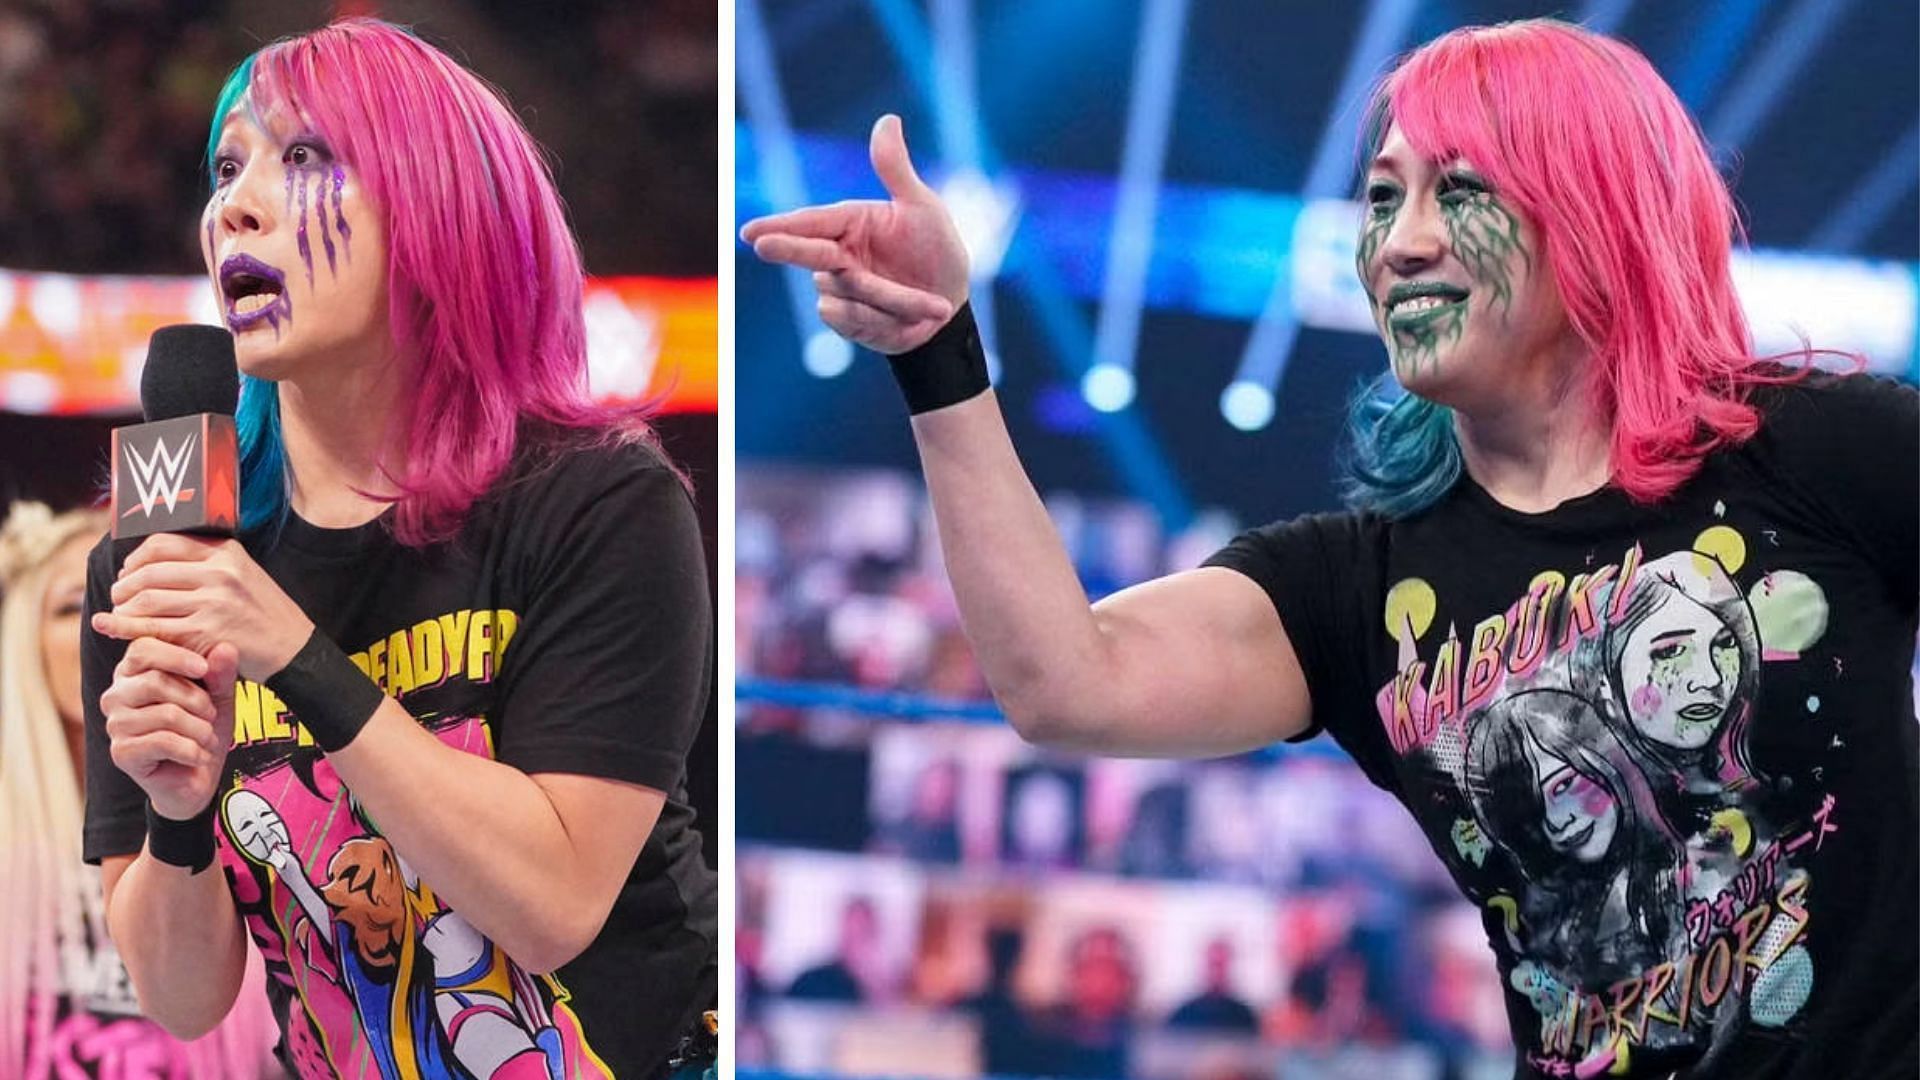 Asuka and IYO SKY had a memorable exchange during a promo last night on WWE RAW